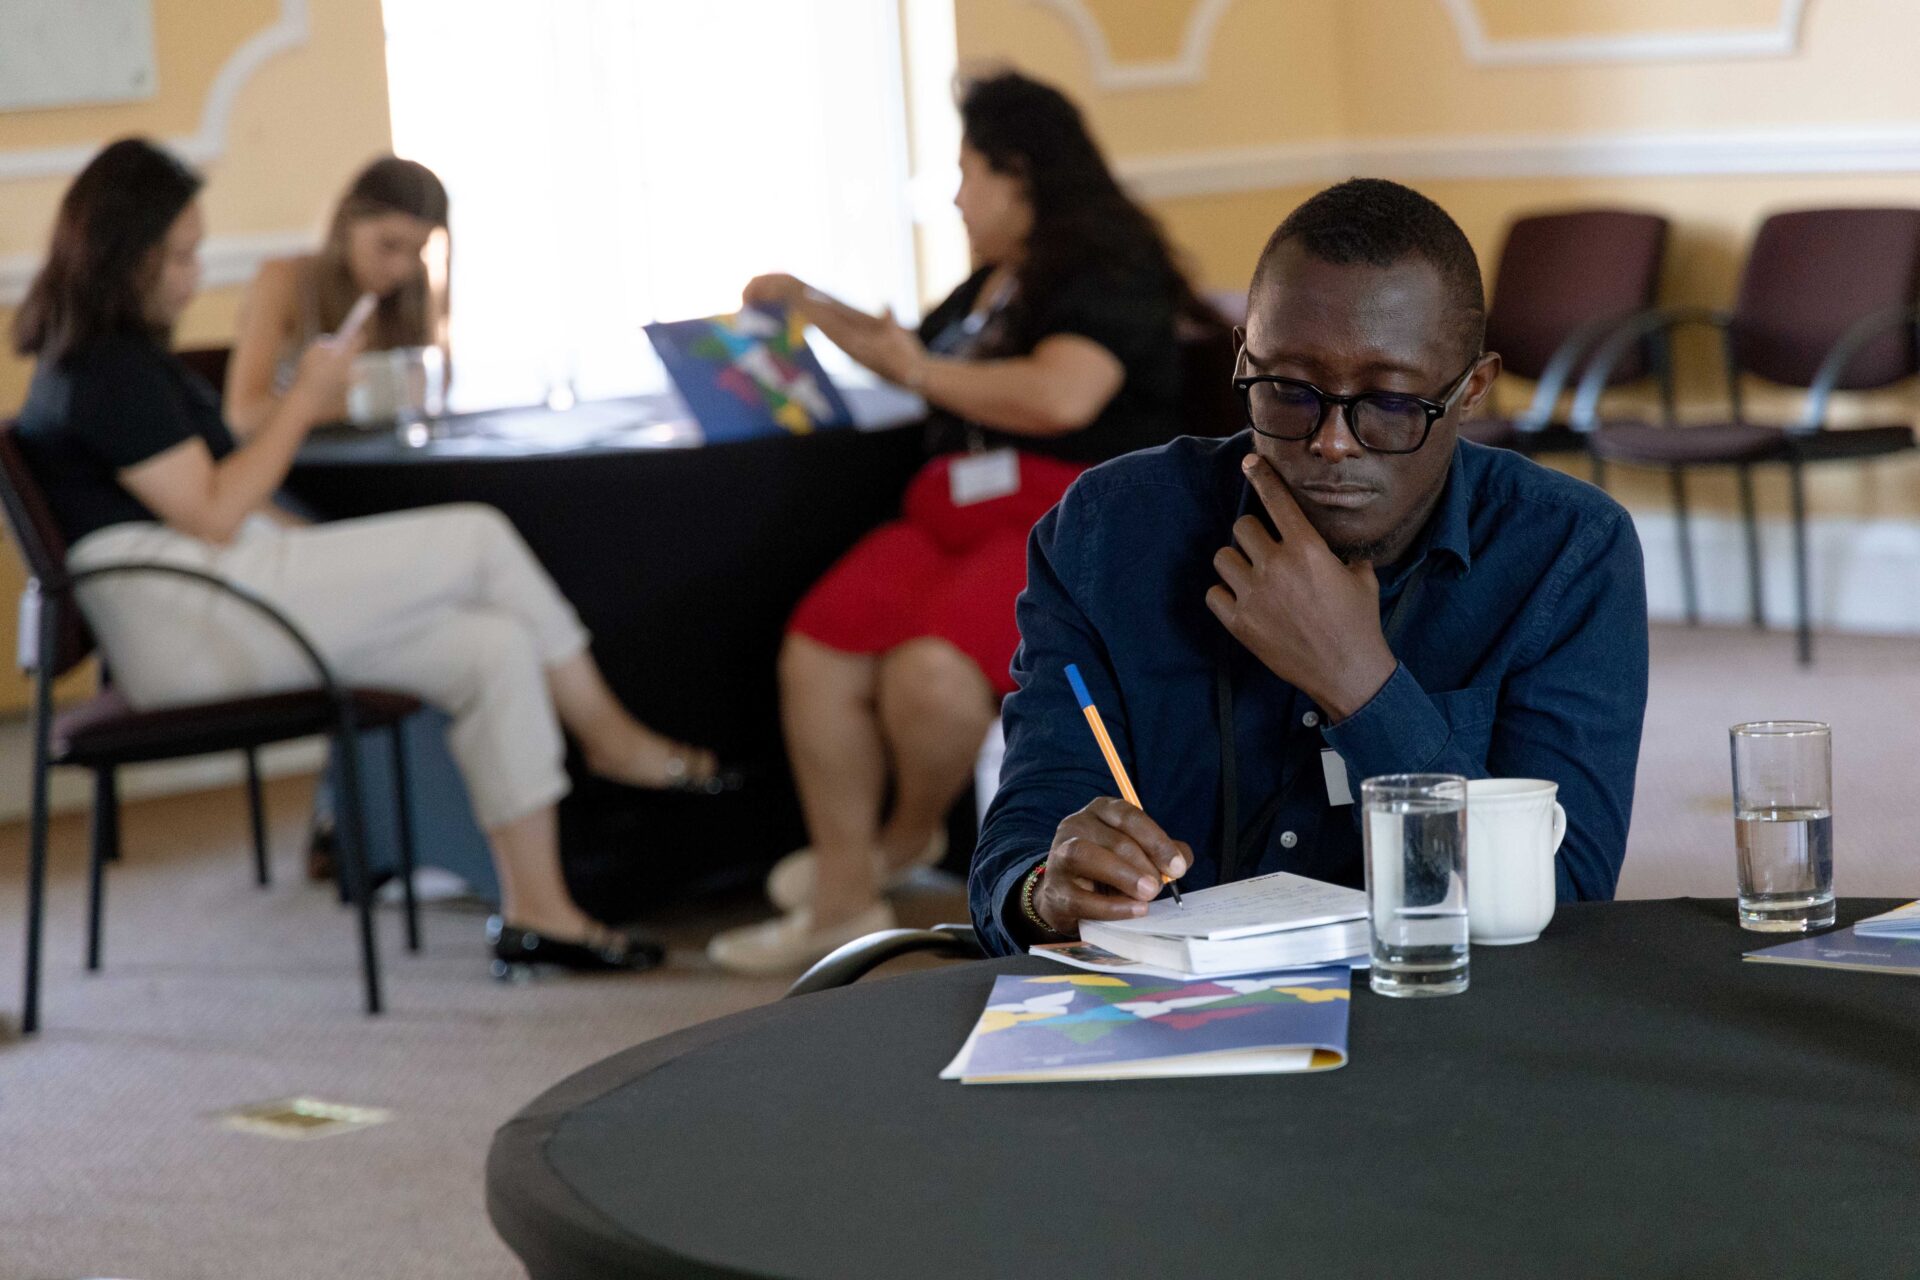 Cumberland Lodge Fellow Sam Wairimu takes notes for his future resources.